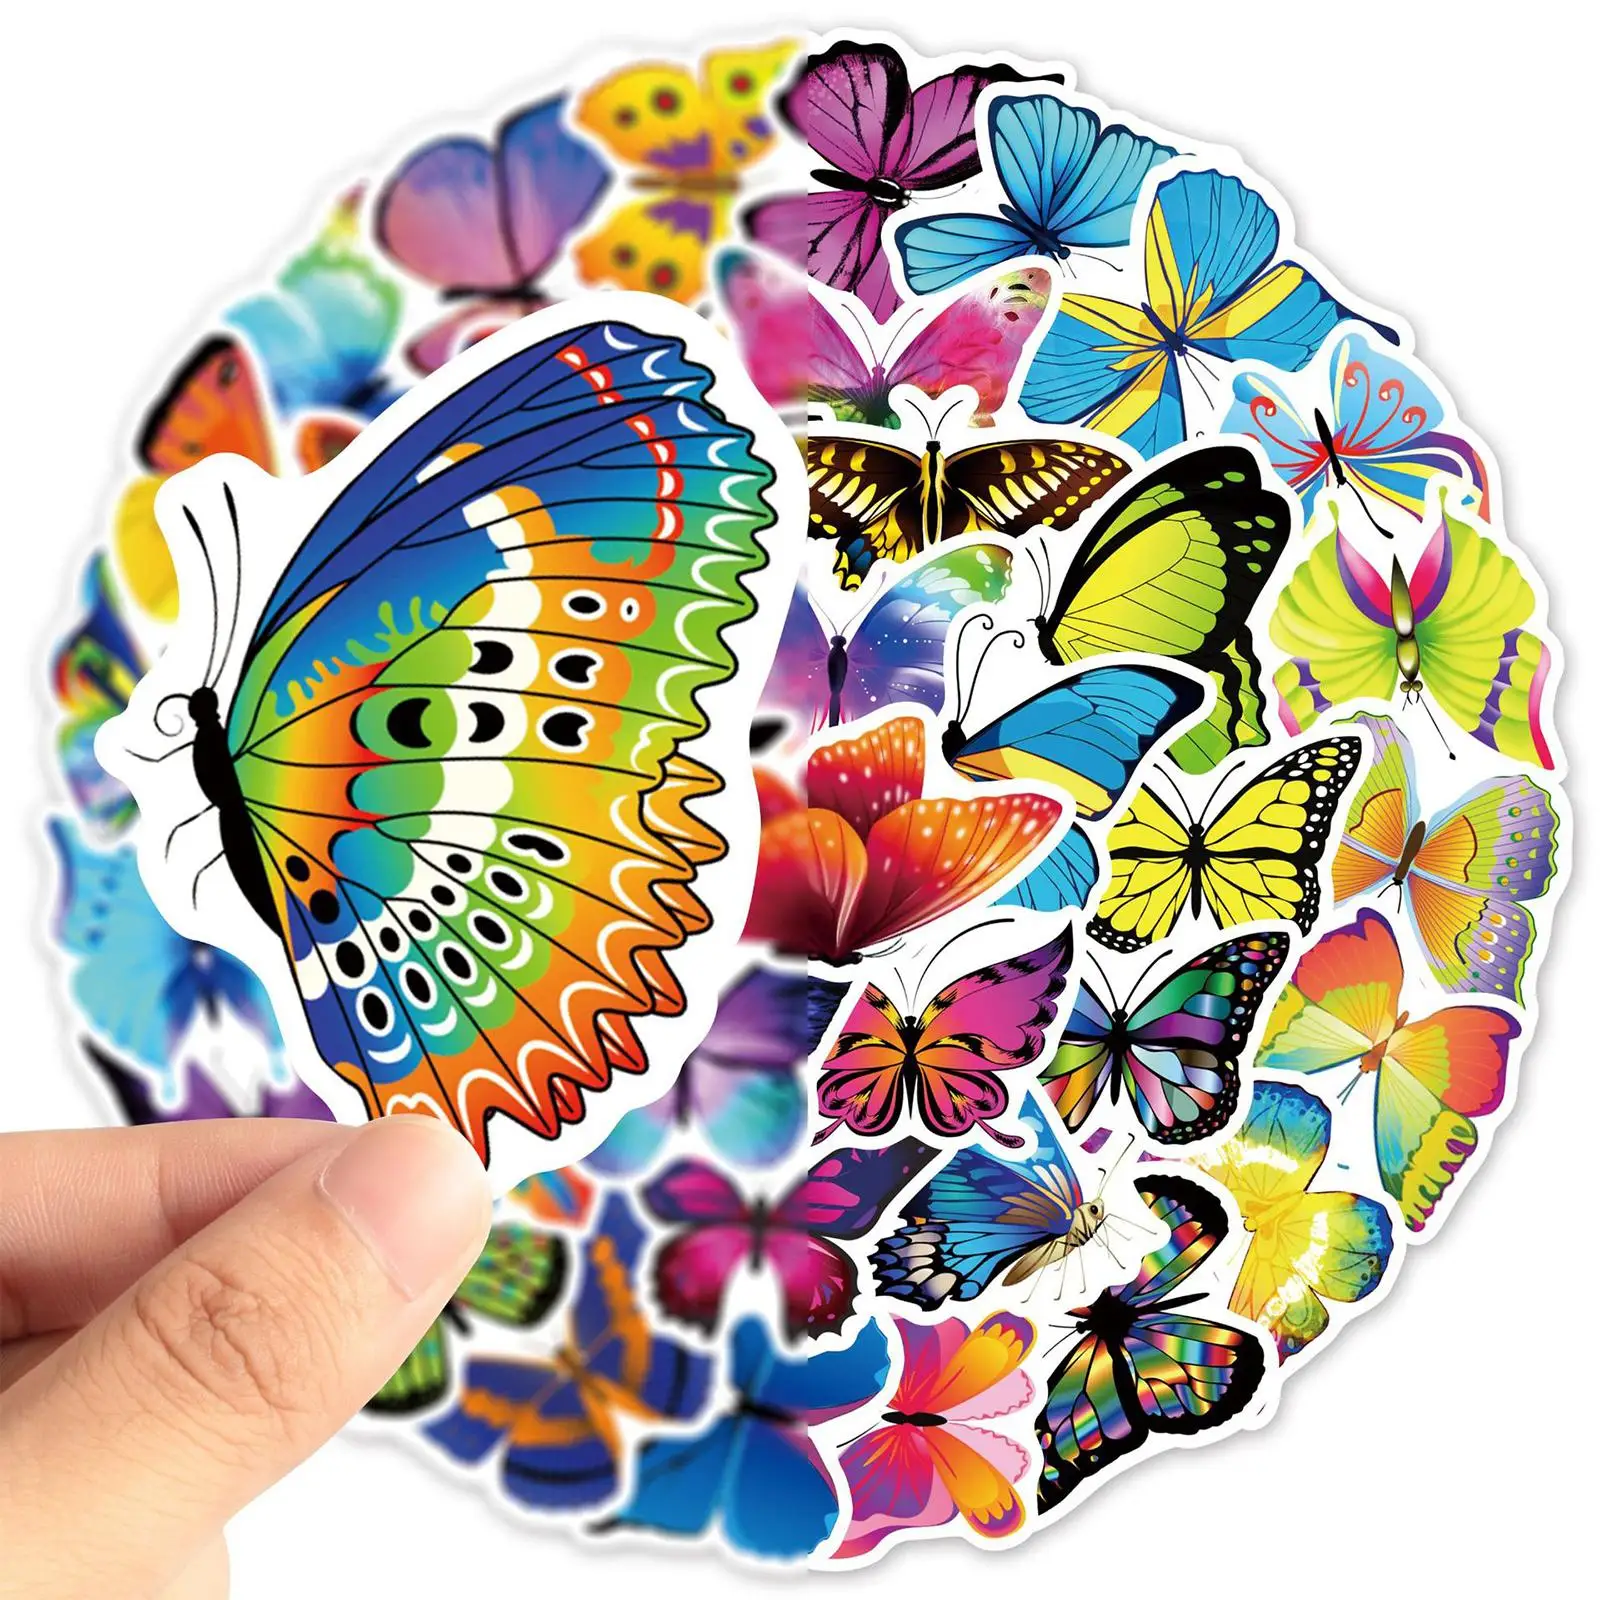 50 Pieces Small Colorful Butterfly Stickers Decorative Waterproof for Scrapbook Laptop Daily Planner Luggage Bike